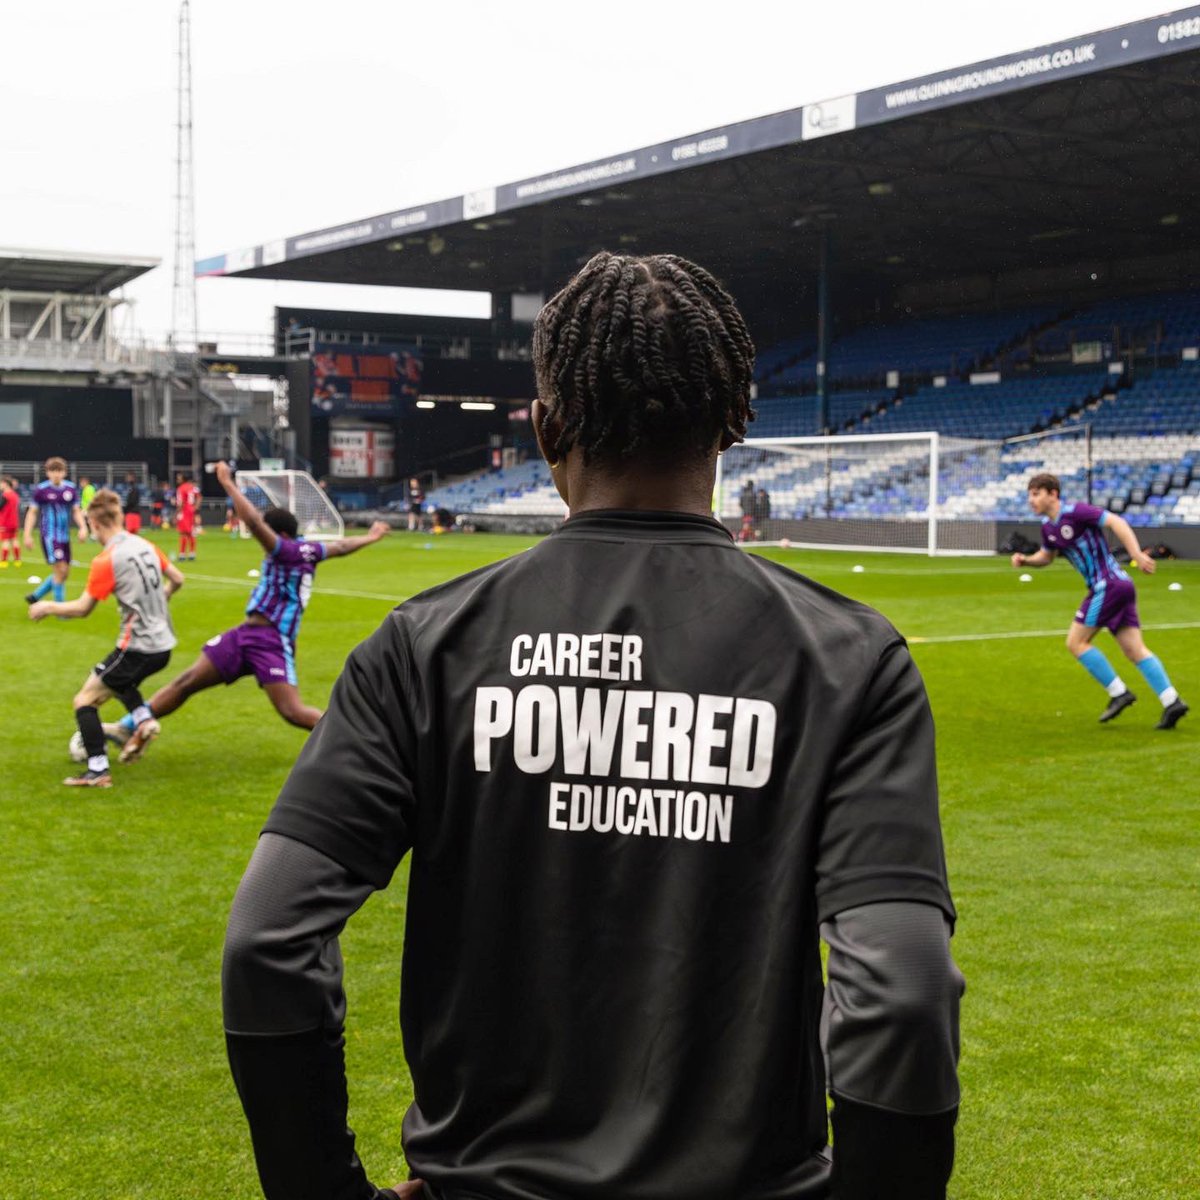 As well as the football tournament everyone joining us also had the opportunity to explore the home of @LutonTown, take part in sport science activities with our academics & find out more about studying sport at university! 💬🎓 #UniofBeds #LutonTown